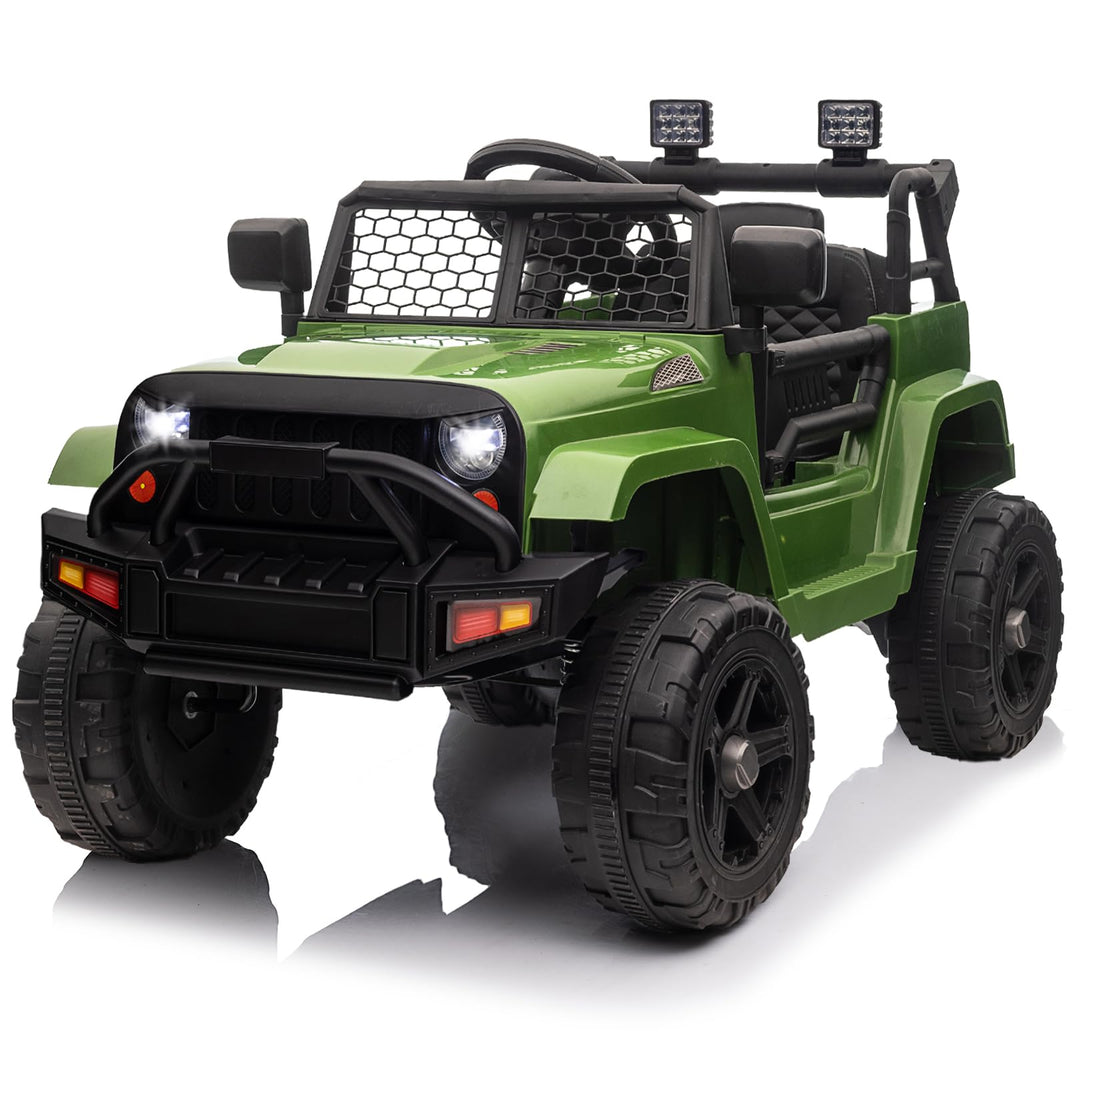 Electric Car for Kids with Remote Control, 12V Ride on Toys for 3+ Year Old, 3 Speeds Truck to Drive, Music MP3, Spring Suspension, Safety Belt, LED Lights, Double Open Doors